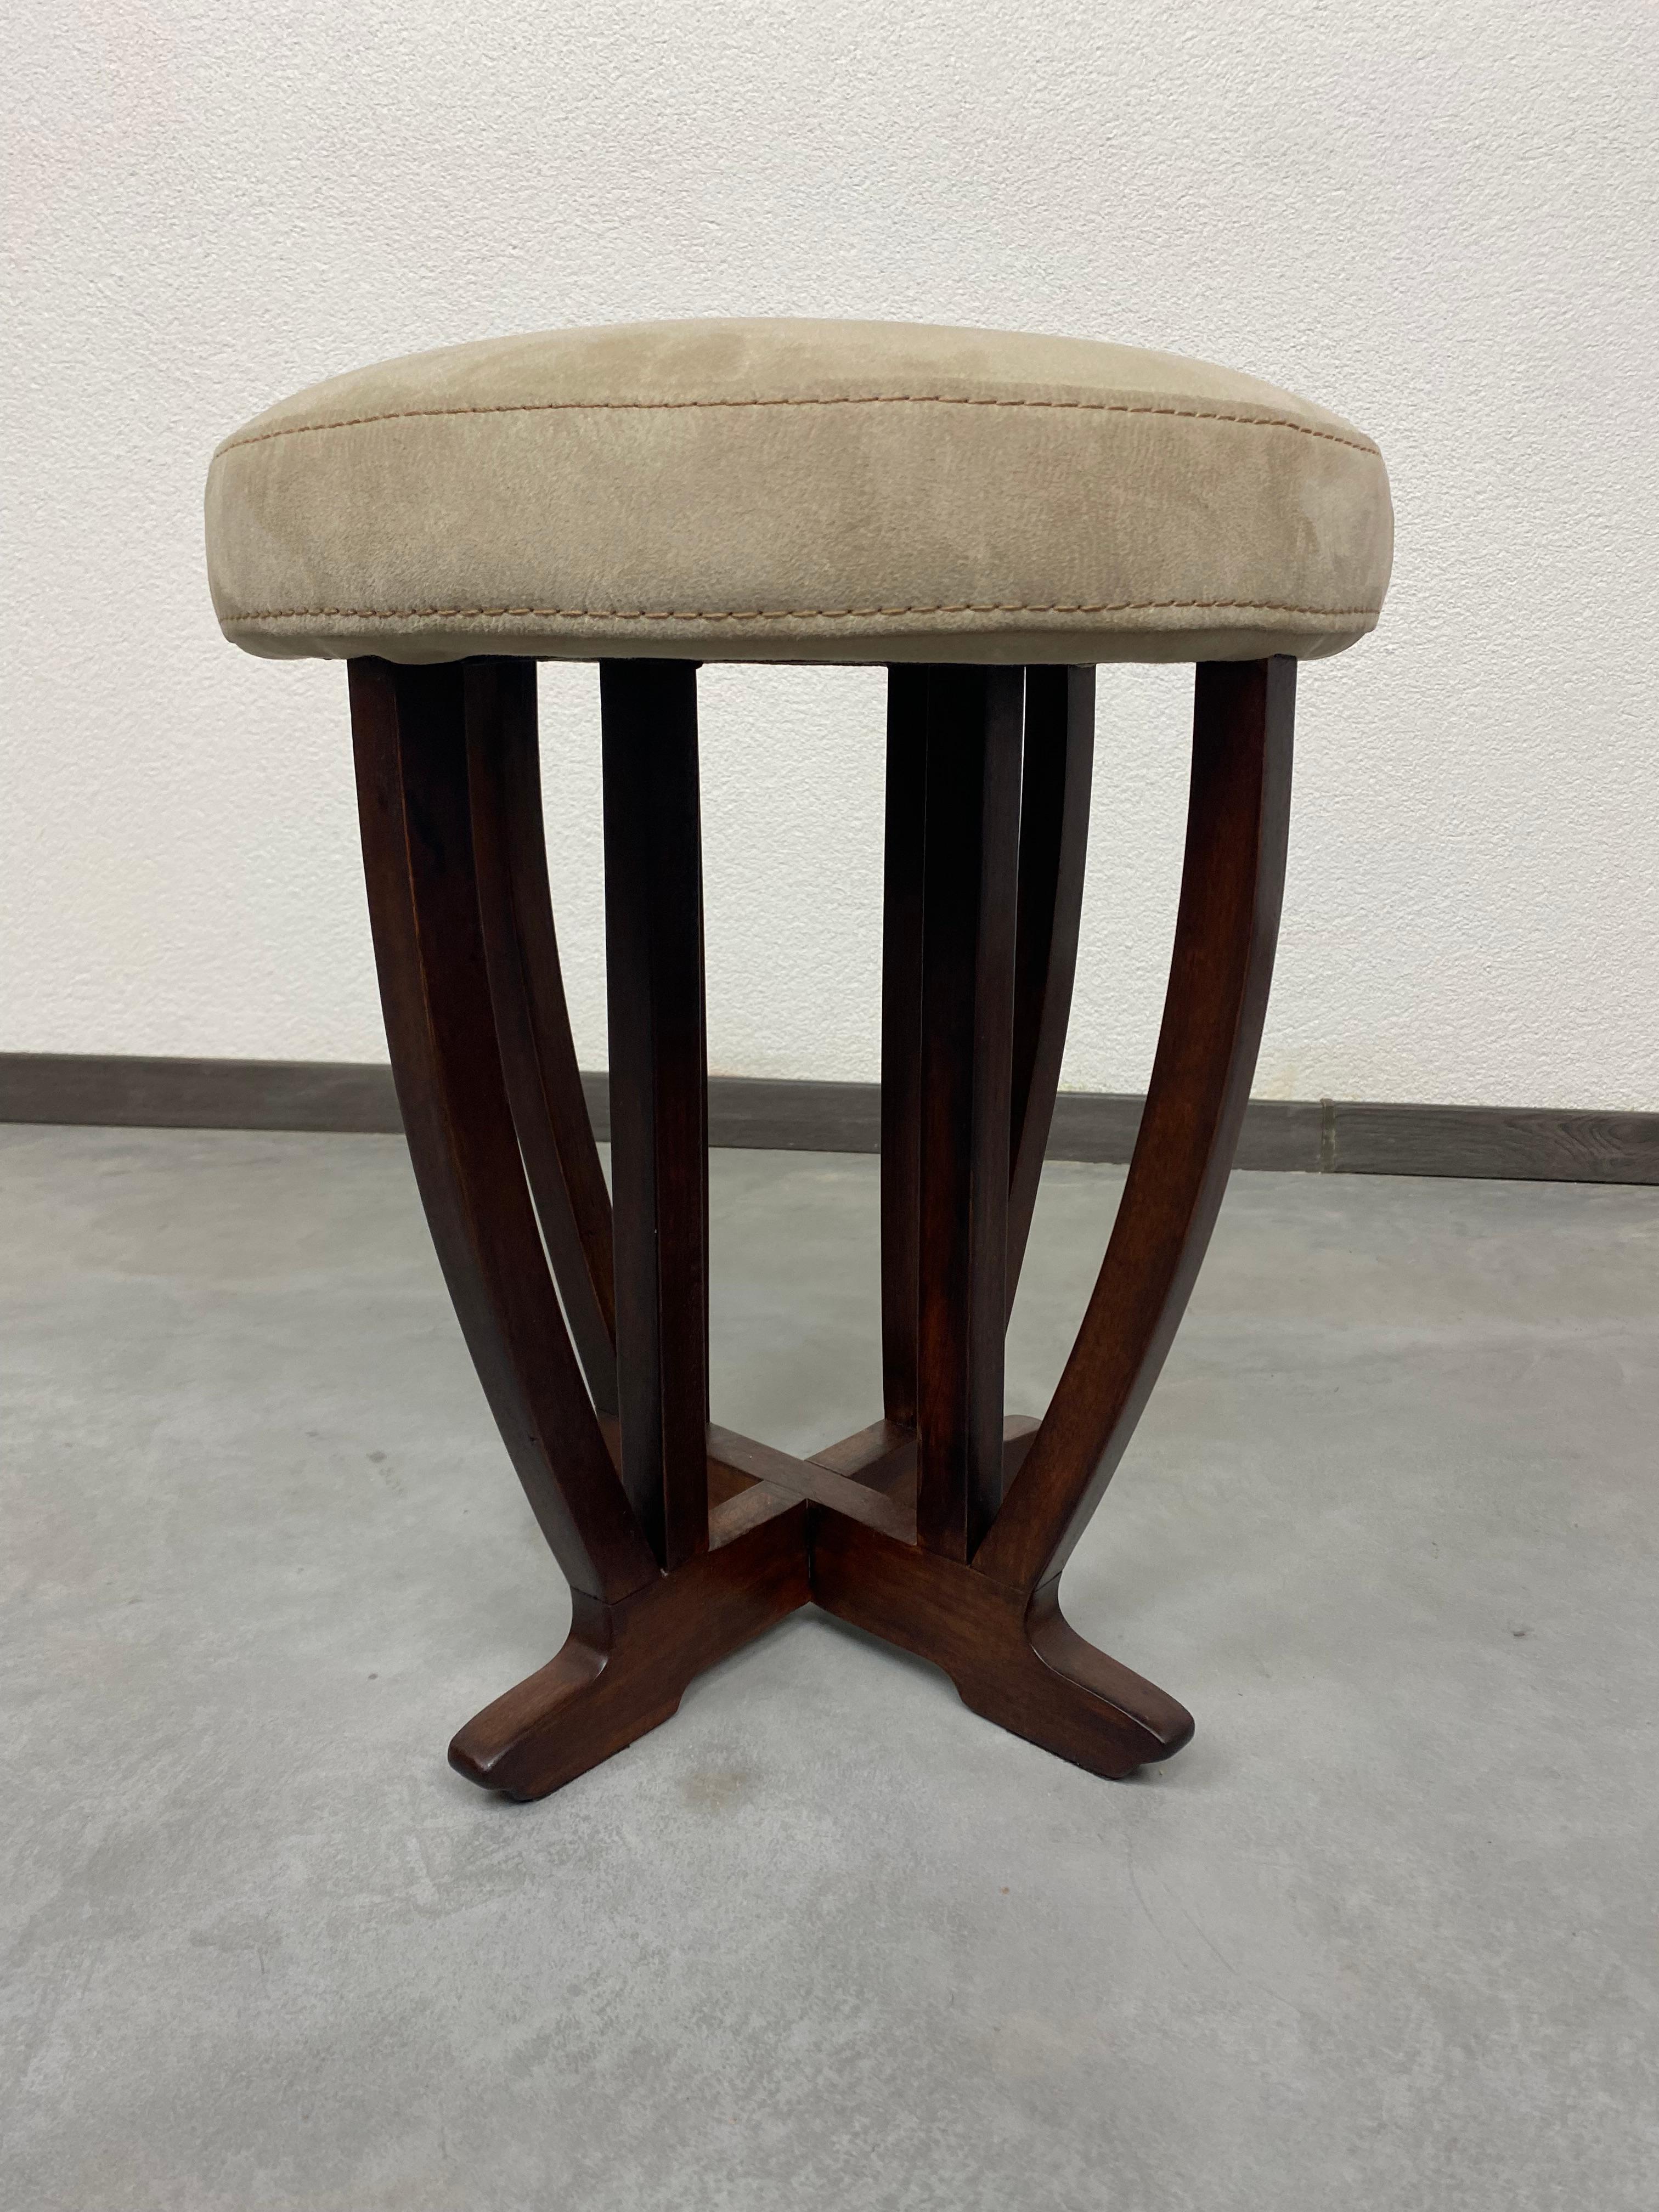 Secession stool professionally stained and repolished.